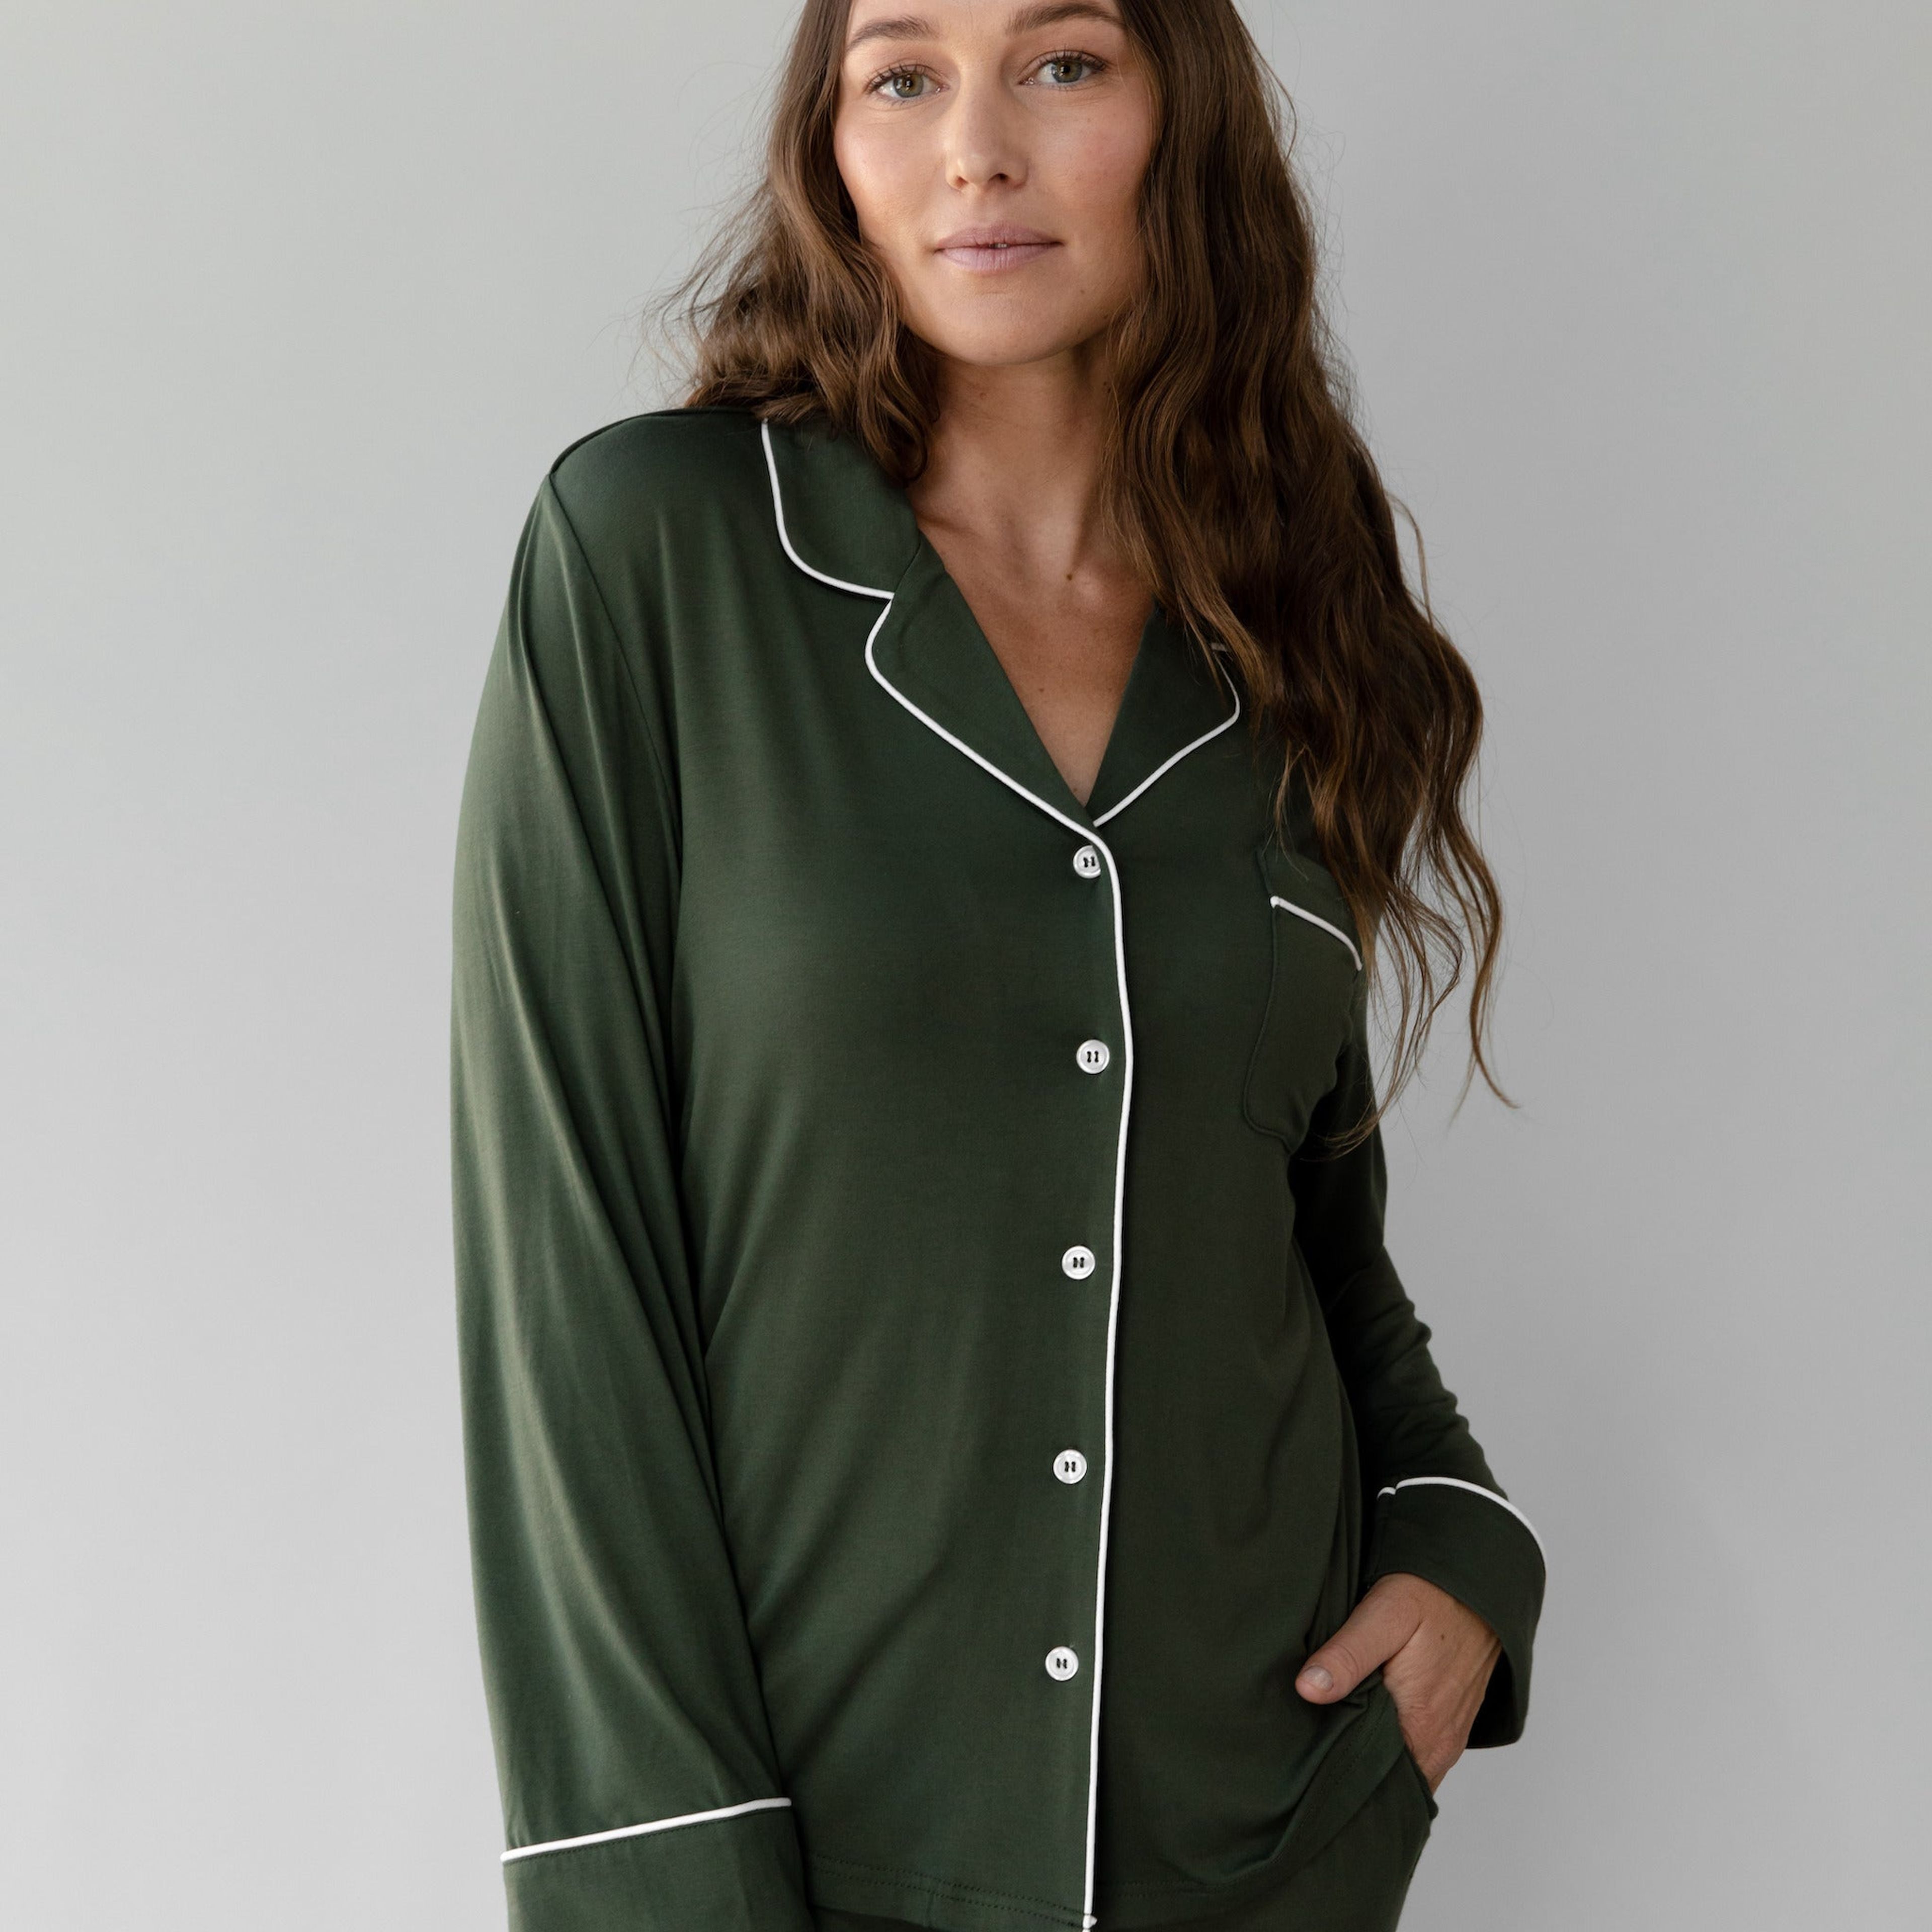 Women's Long Sleeve Bamboo Pajama Top in Stretch-Knit